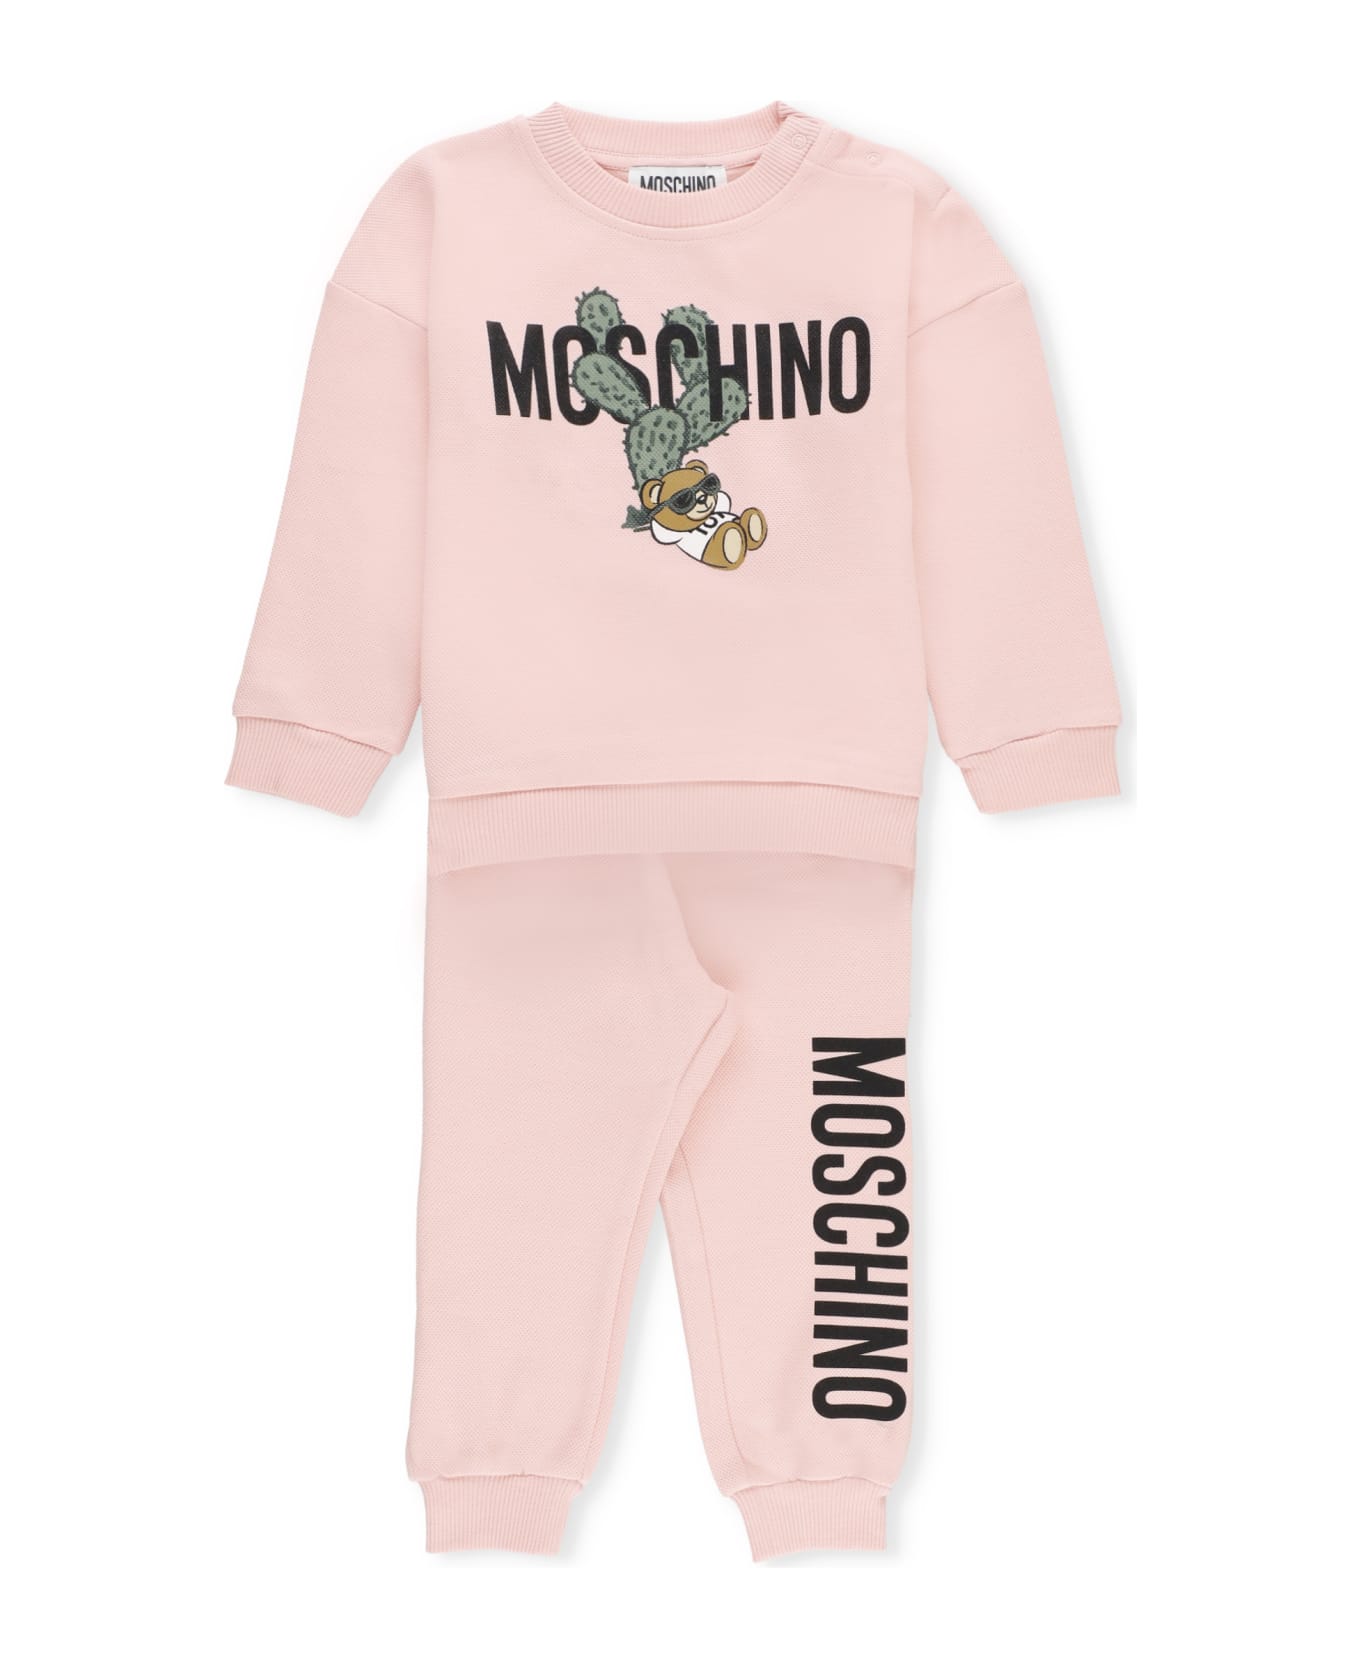 Moschino Cactus Teddy Bear Two Piece Suit - Pink